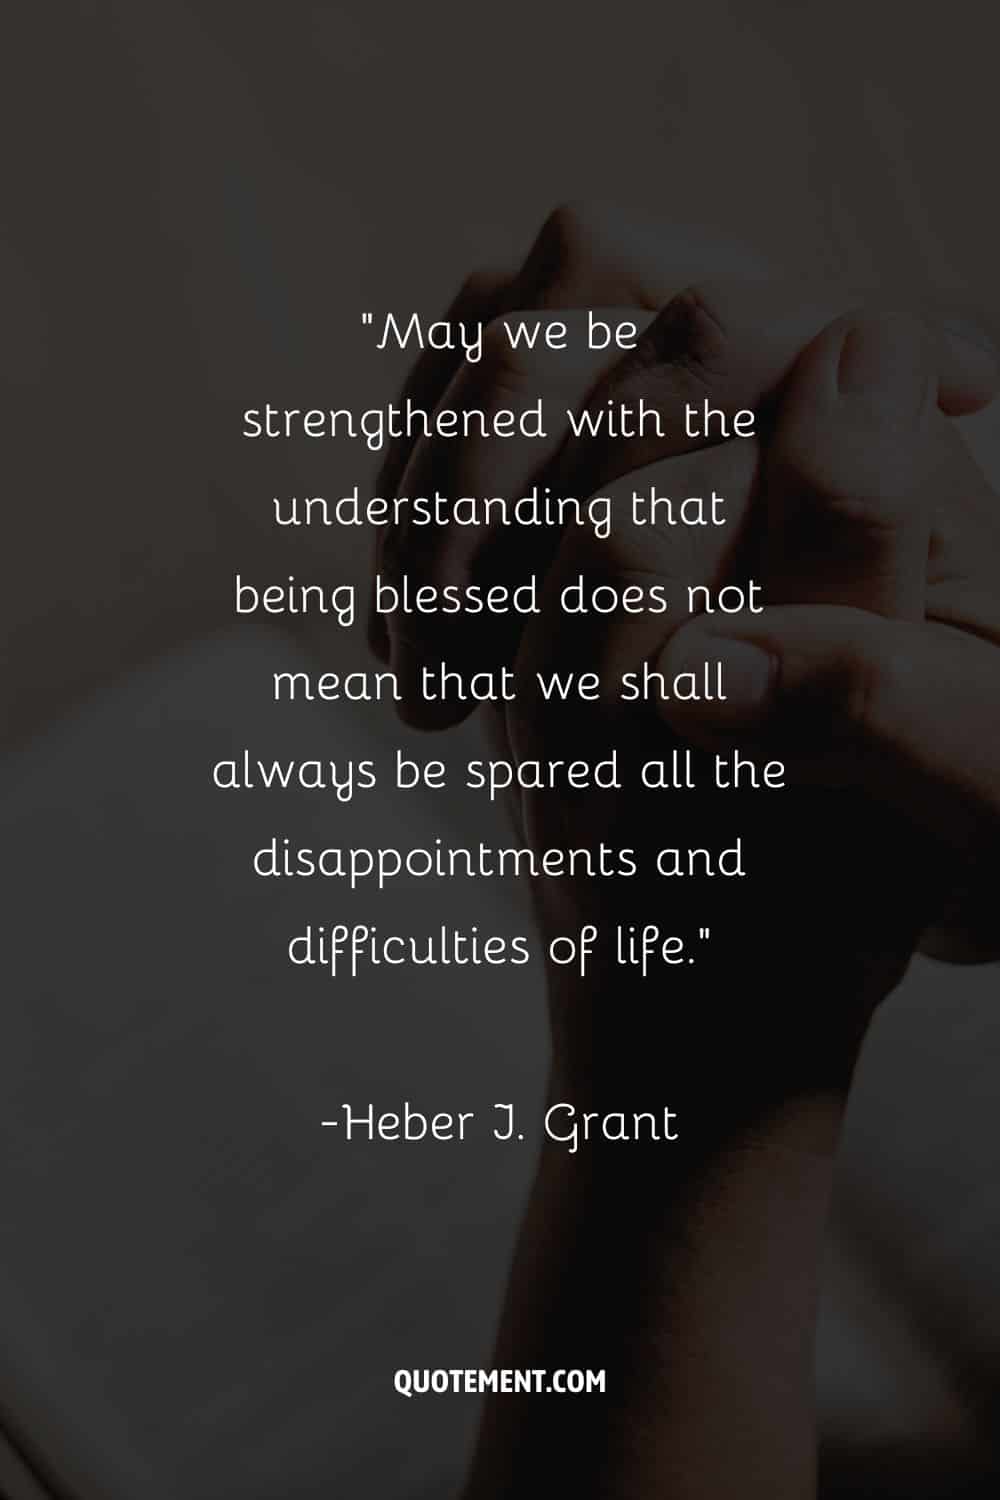 May we be strengthened with the understanding that being blessed does not mean that we shall always be spared all the disappointments and difficulties of life.